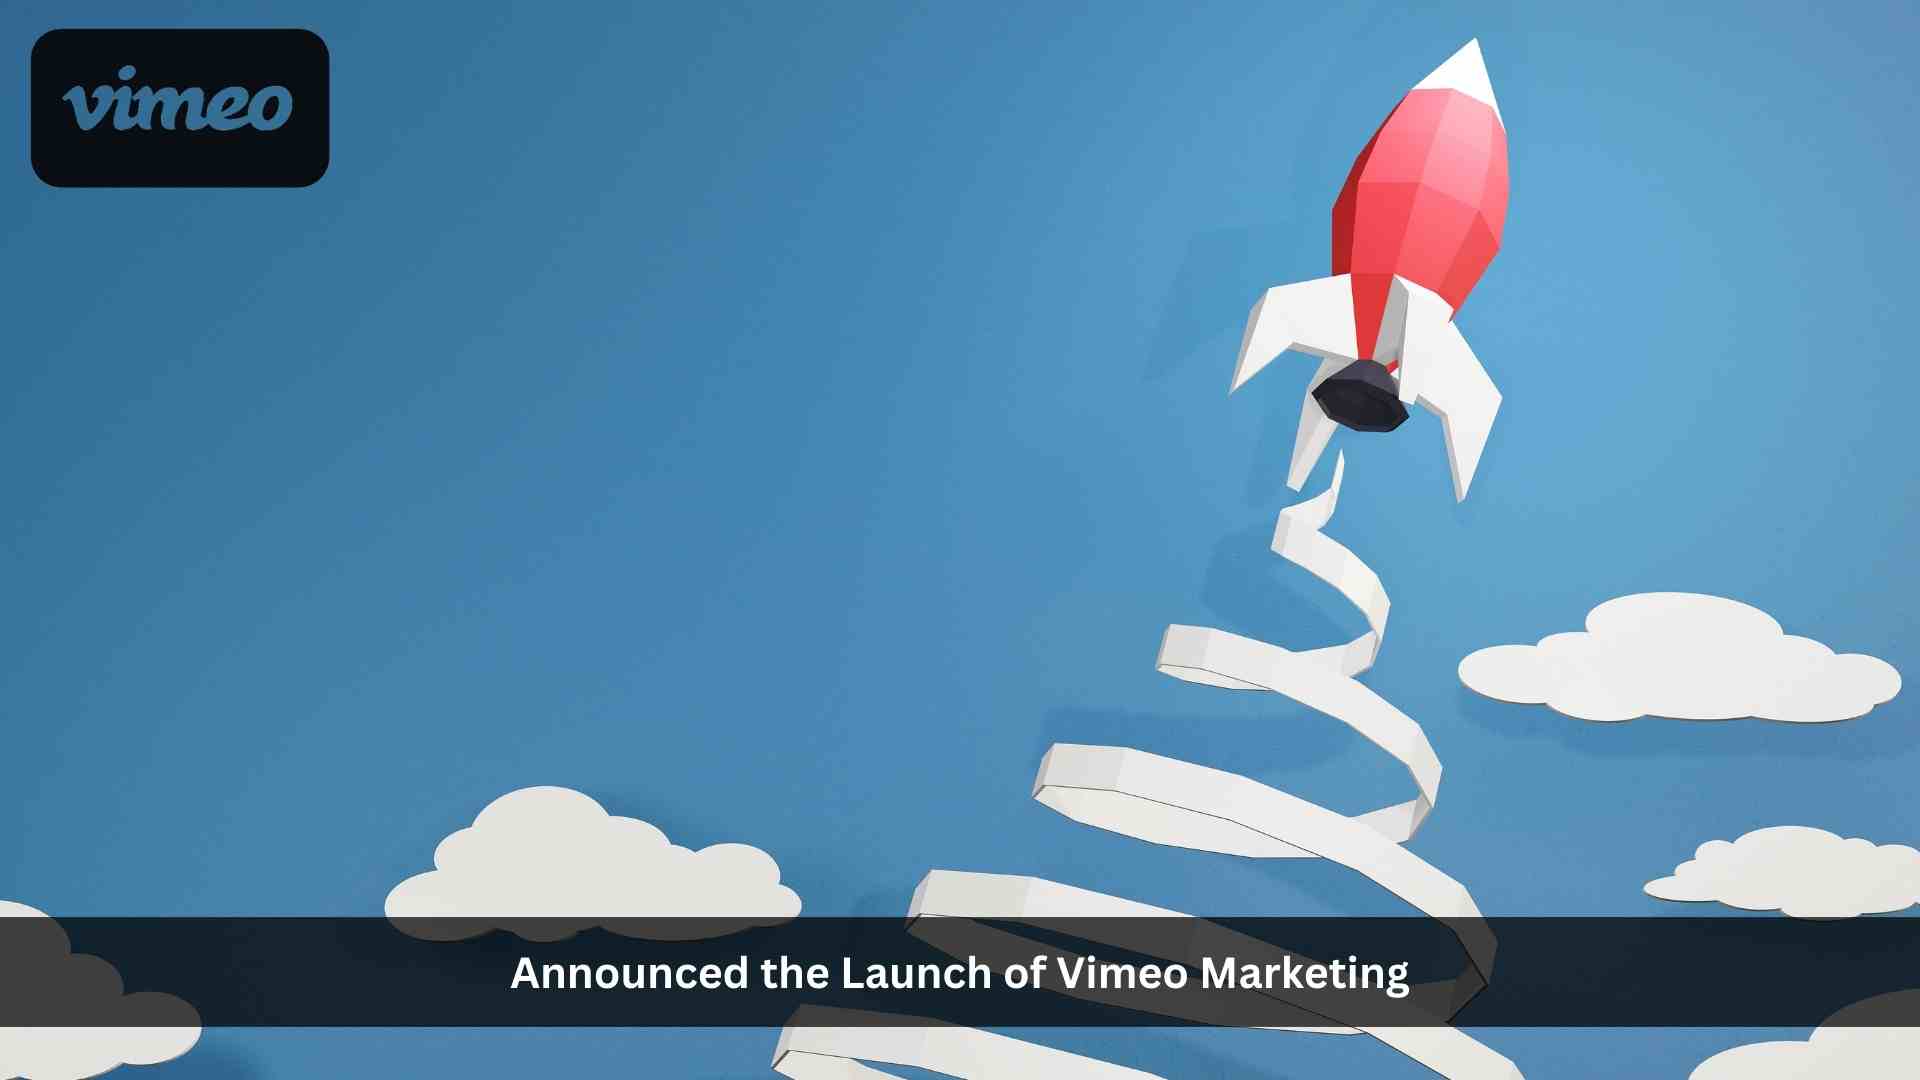 Vimeo Marketing launches to give marketers an integrated toolset for enabling audience engagement and supporting business growth